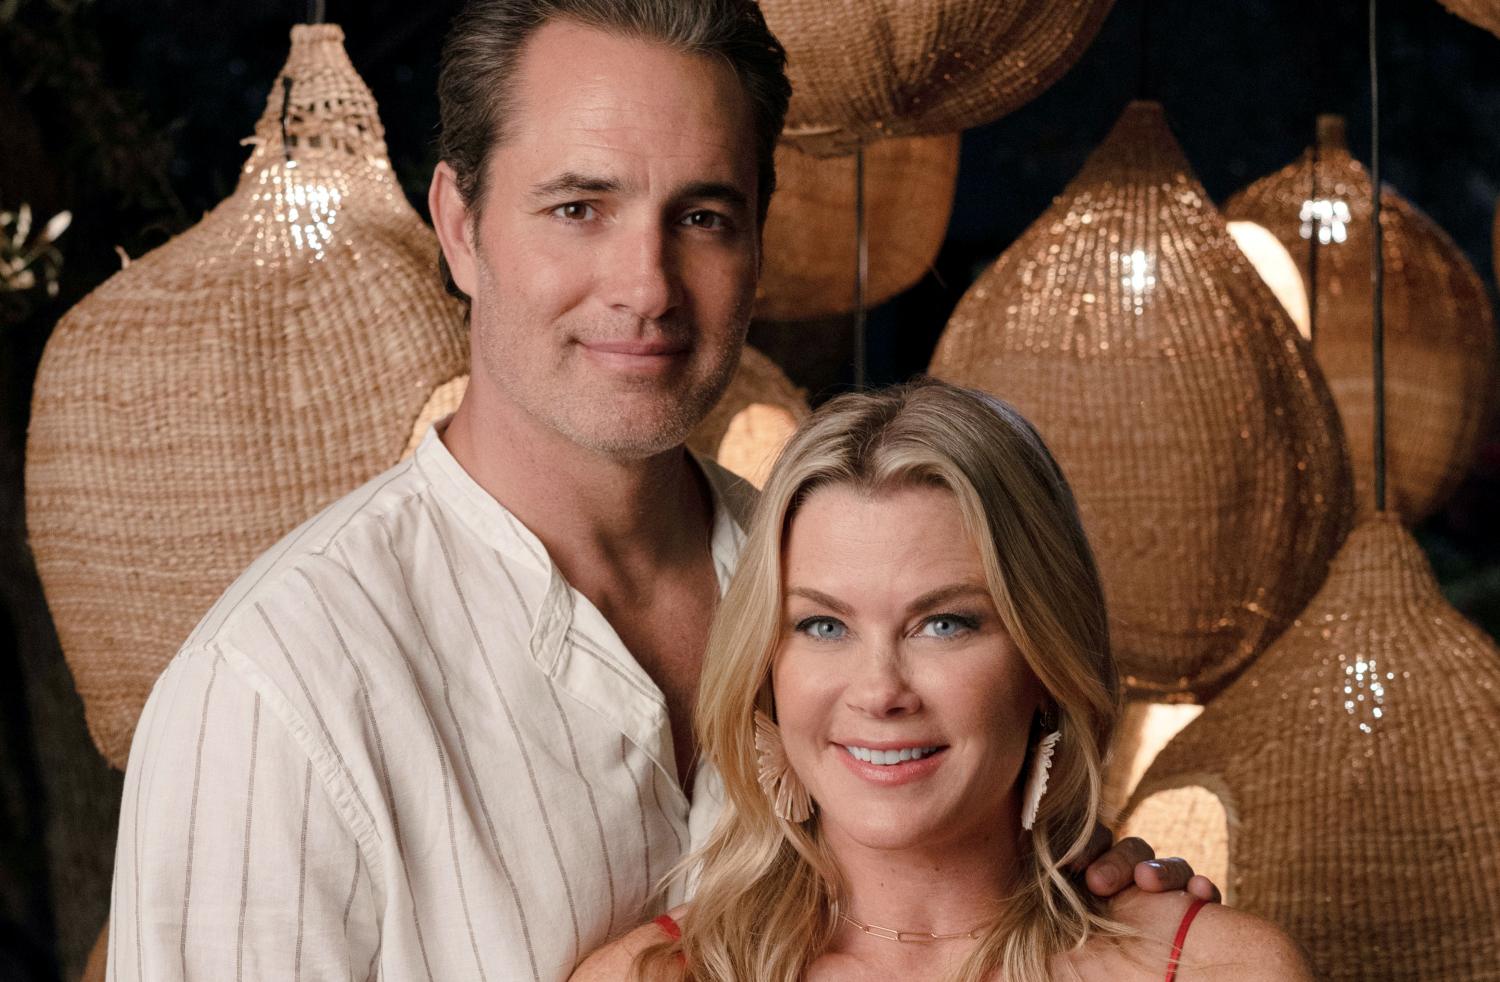 Alison Sweeney and Victor Webster star in One Bad Apple: A Hannah Swensen Mystery